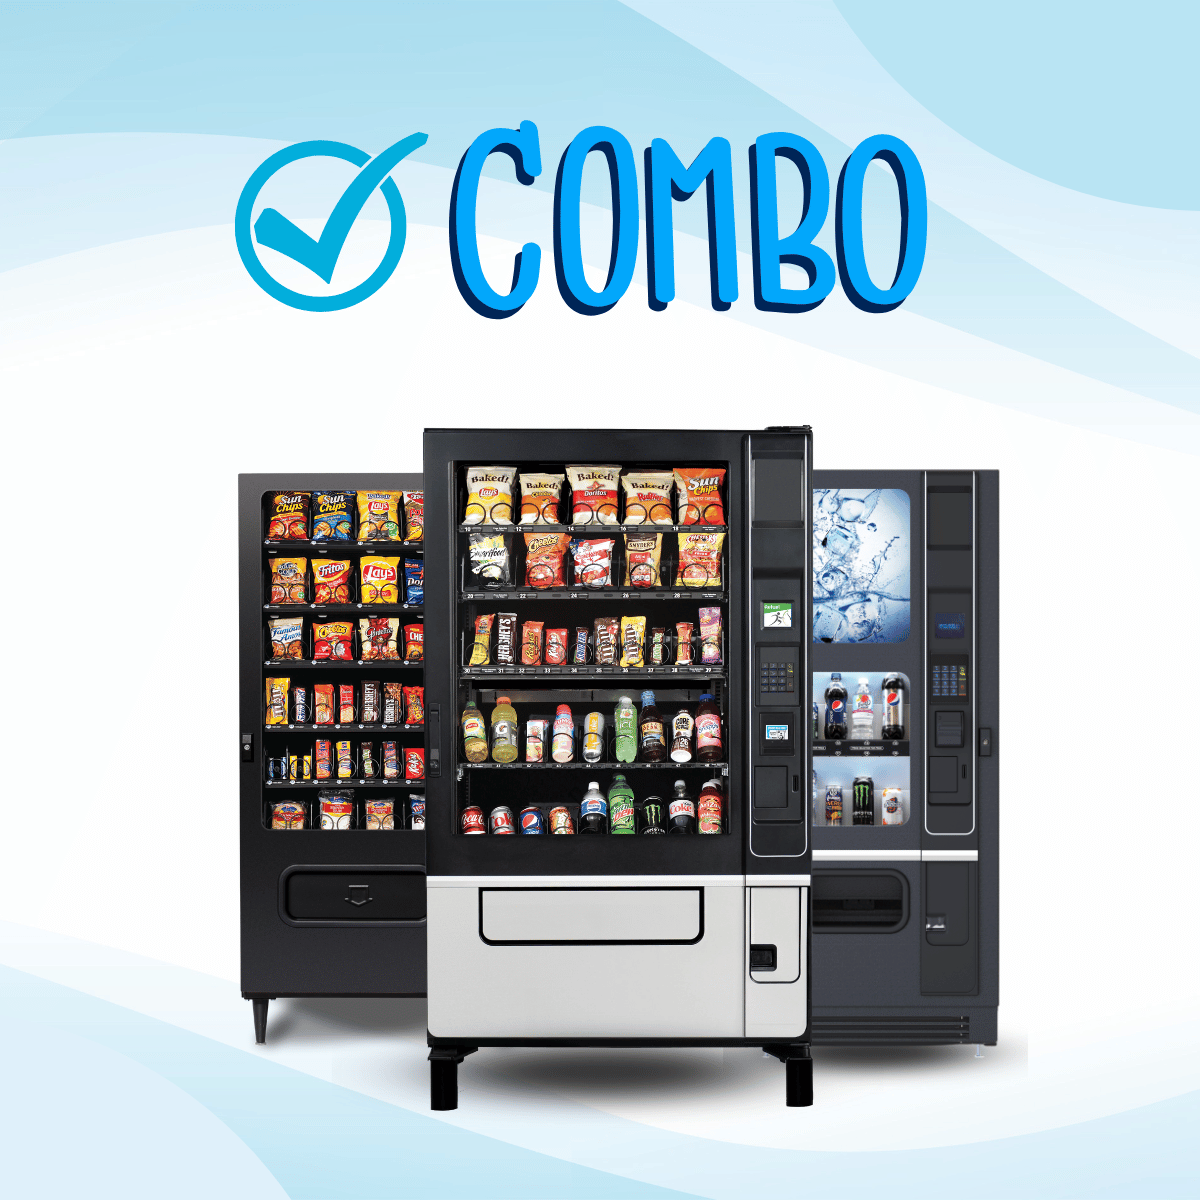 COMBO VENDING MACHINES GIVE YOUR CUSTOMERS THE BEST OF BOTH WORLDS